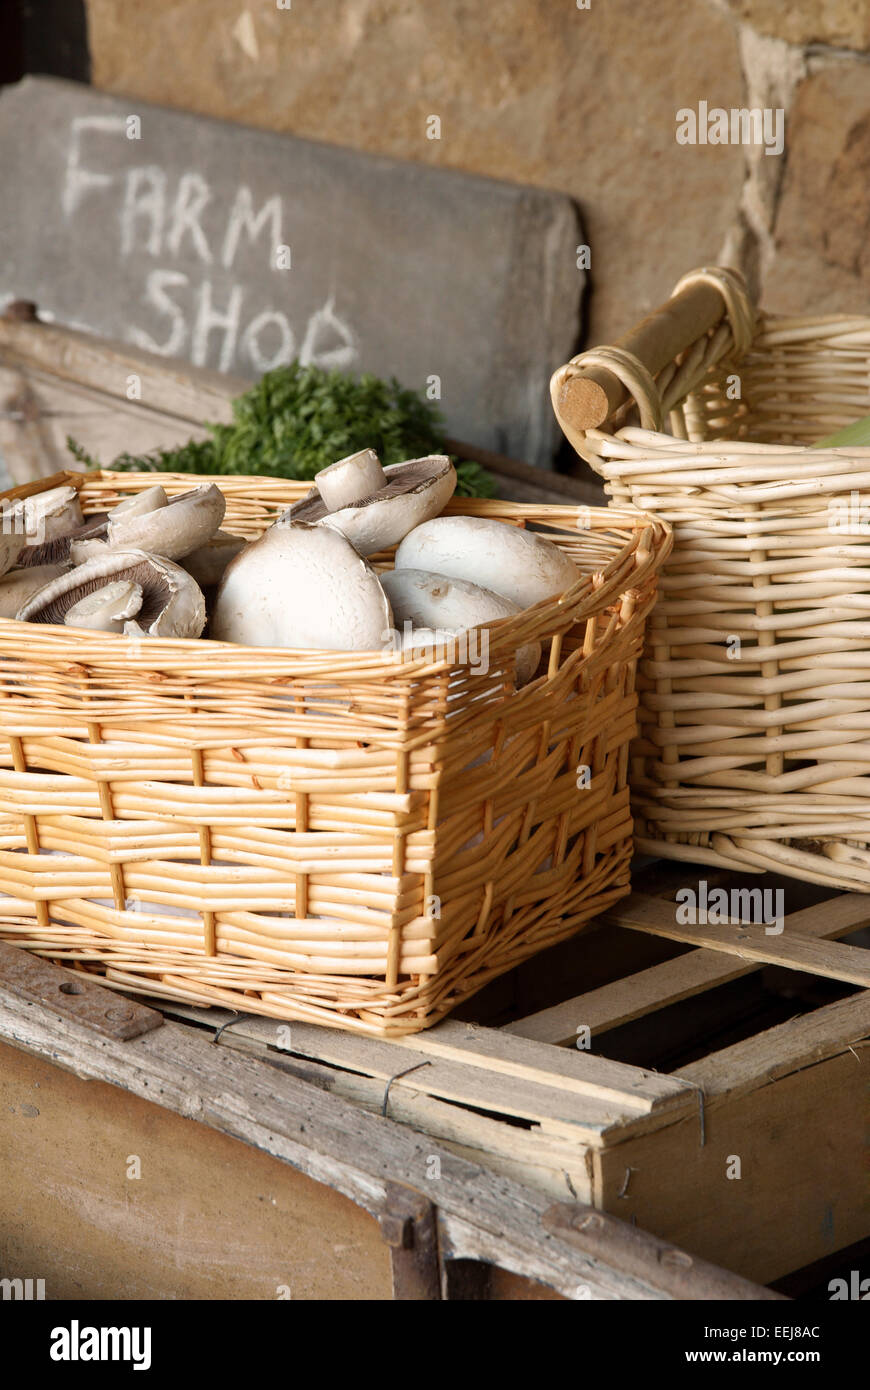 Fresh produce for sale in baskets at a farm shop Stock Photo